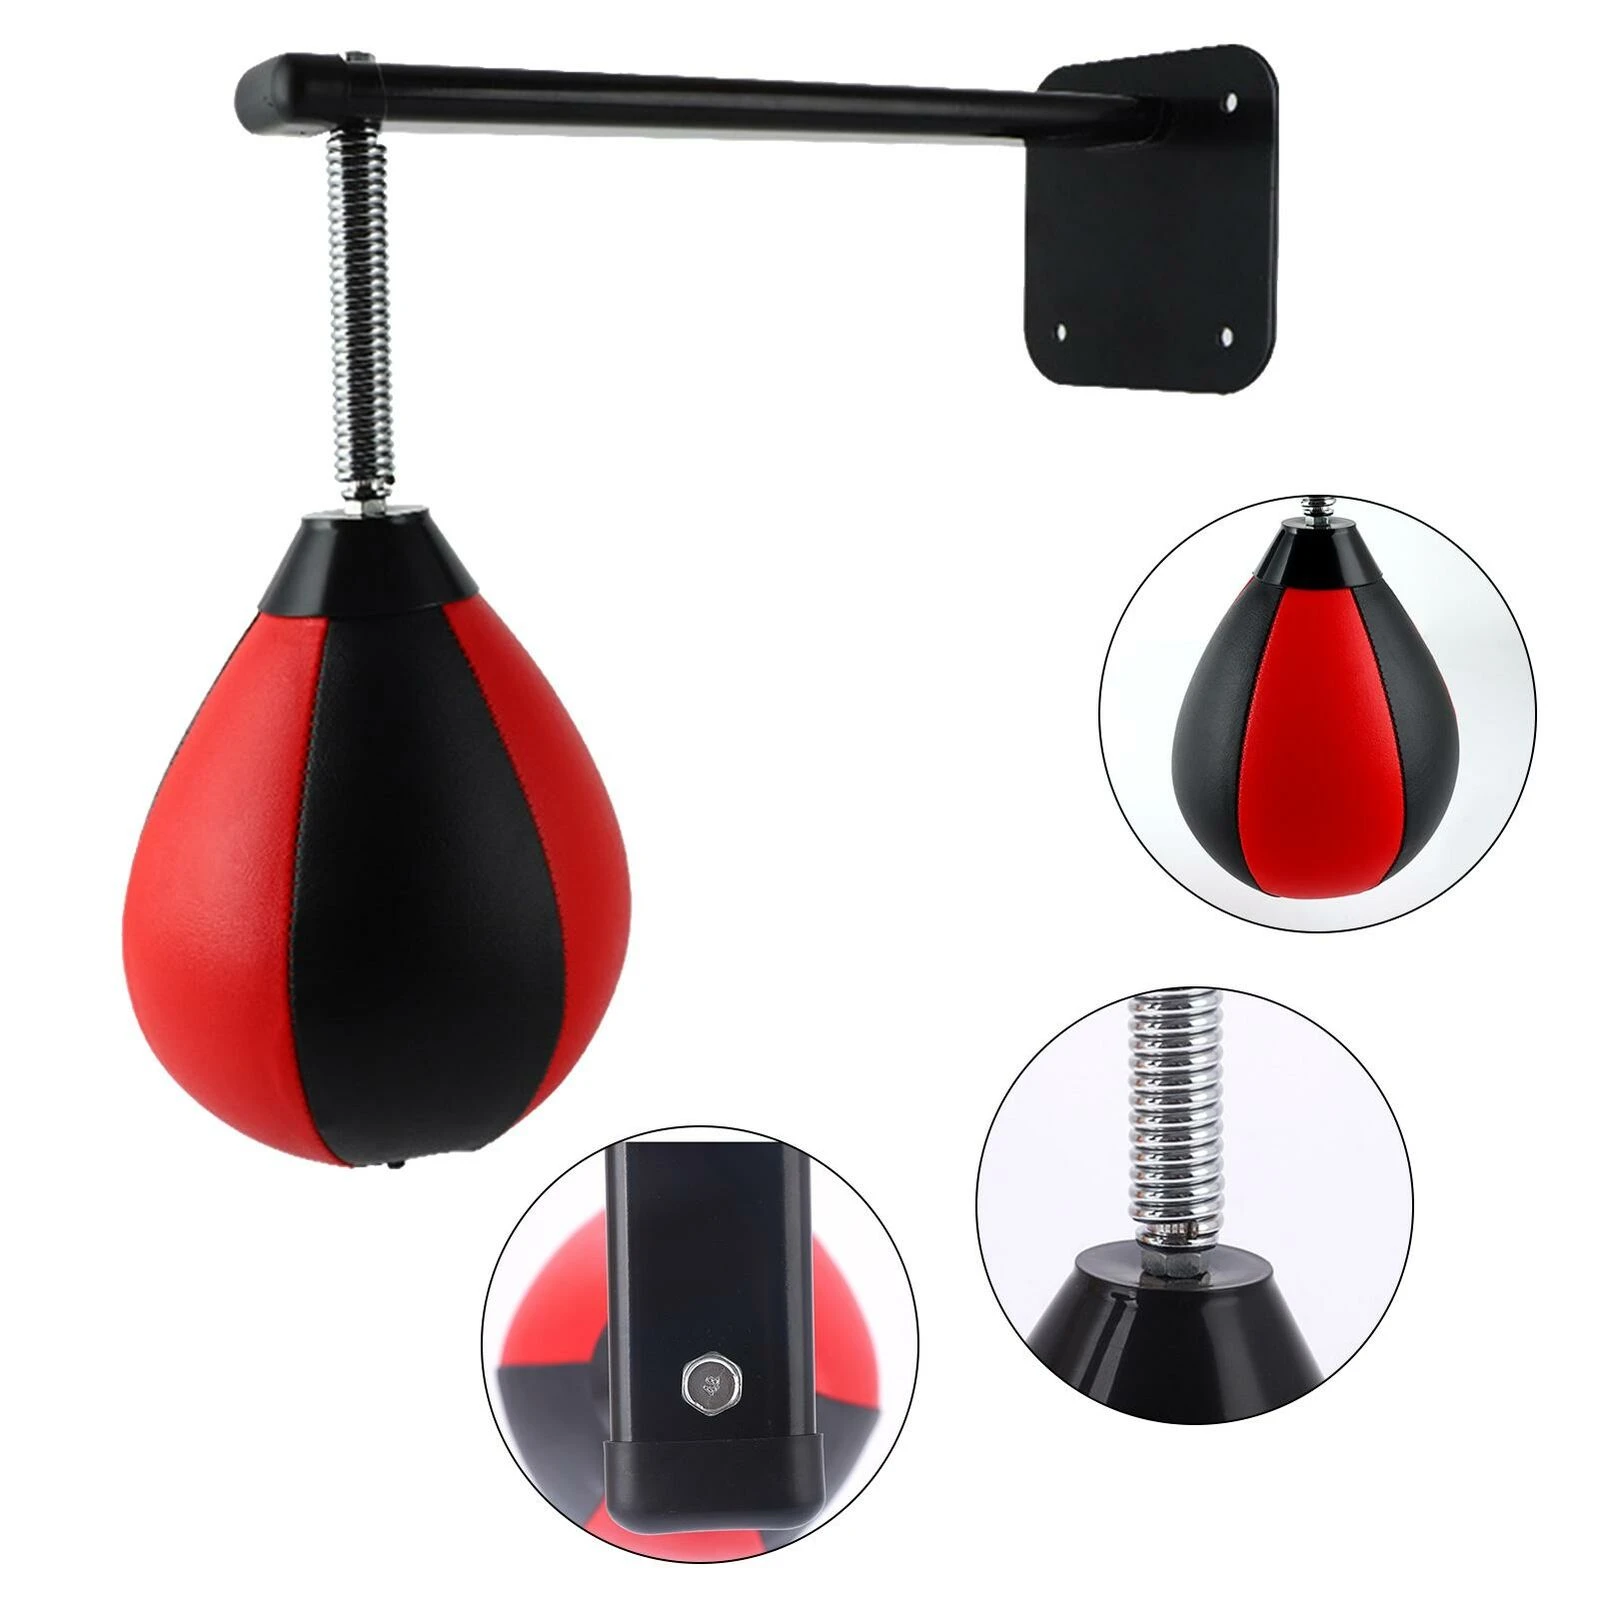 Top Quality Design PU Leather Punching Ball Pear Boxing Bag Reflex Speed Balls Fitness Training Double End Boxing Speed Balls